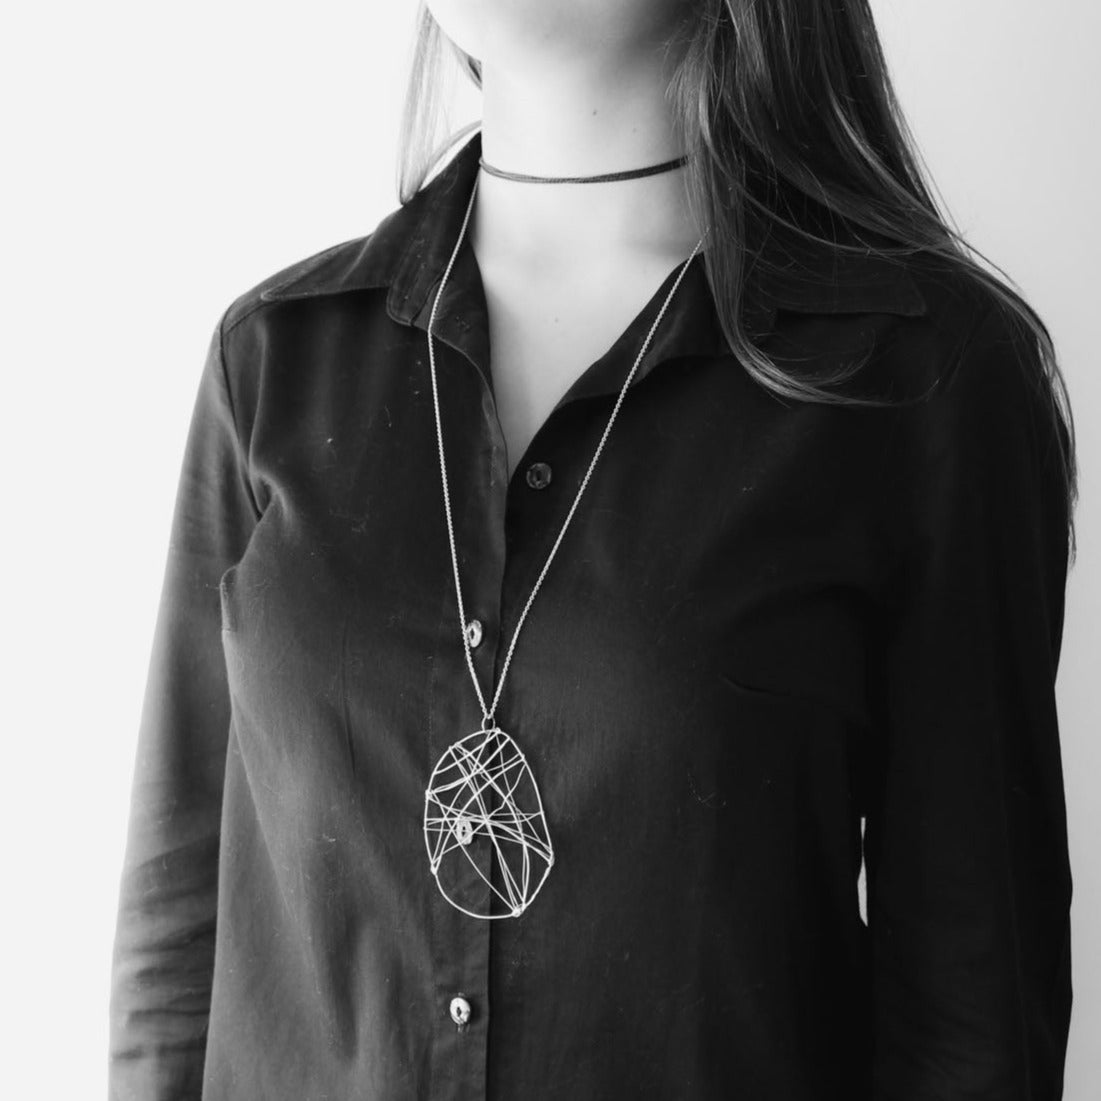 long  statement necklace in 925 eco sterling silver with wing shaped pendant